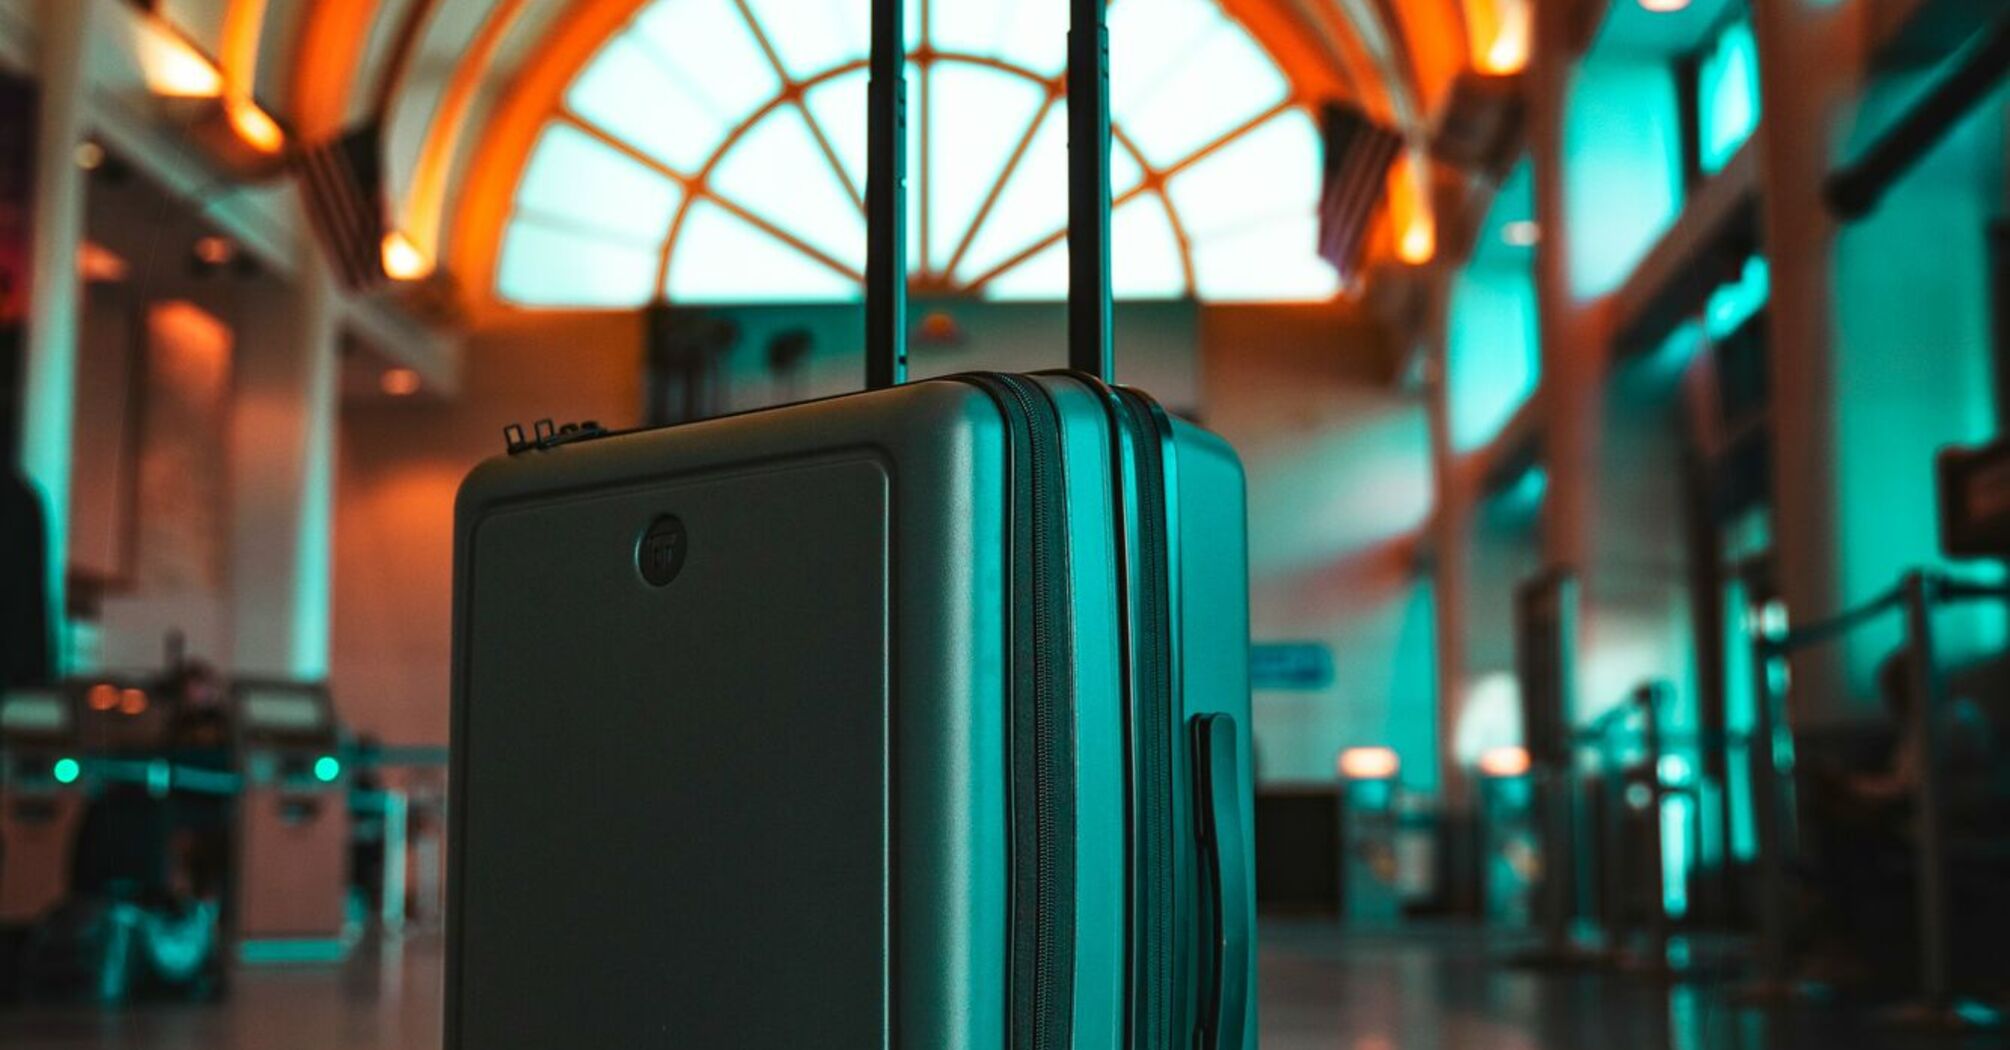 A sleek, teal suitcase stands in a modern airport under a curved, illuminated archway